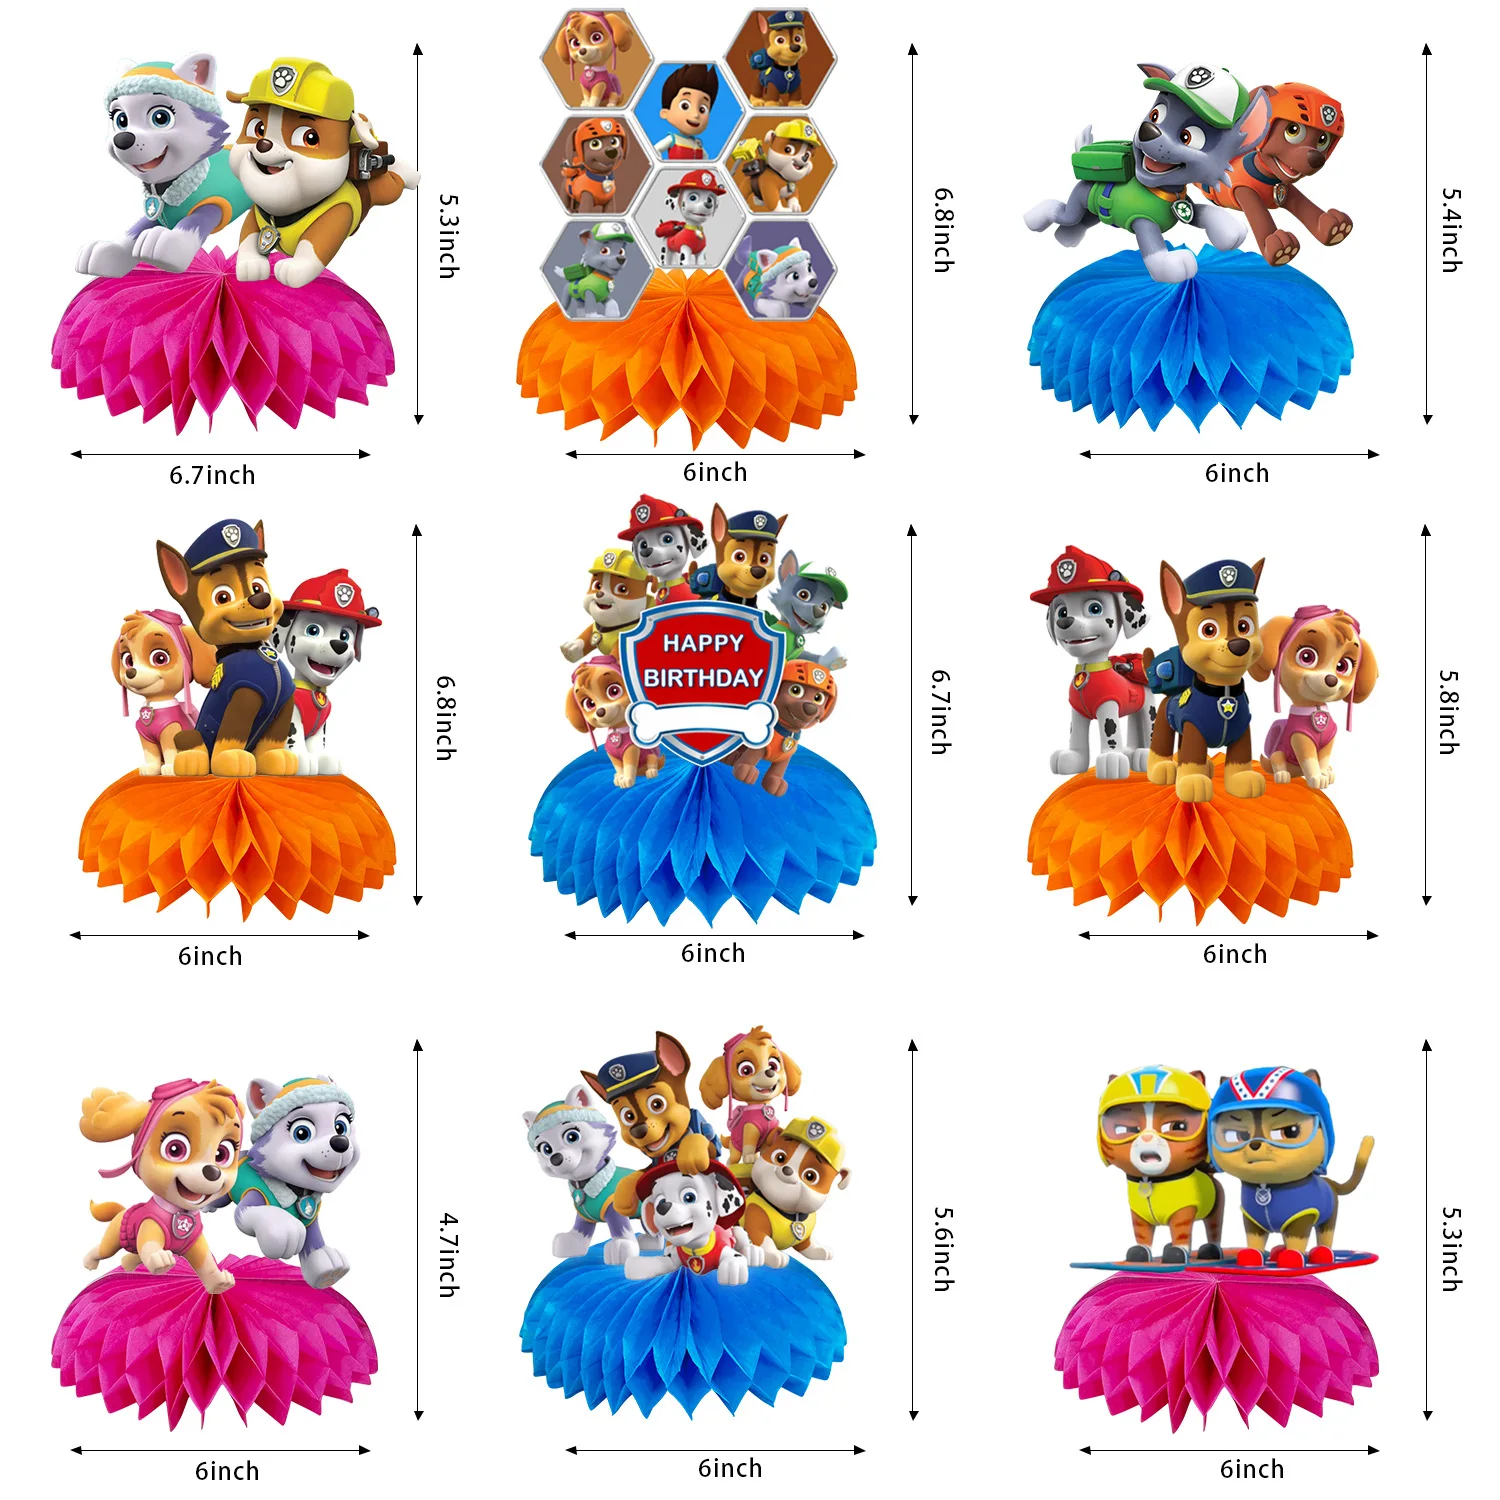 

Paw Patrol Toys Party Honeycomb Ornament Table Top Table Chase Skye Marshall Rubble Rocky Children's Birthday Table Decoration